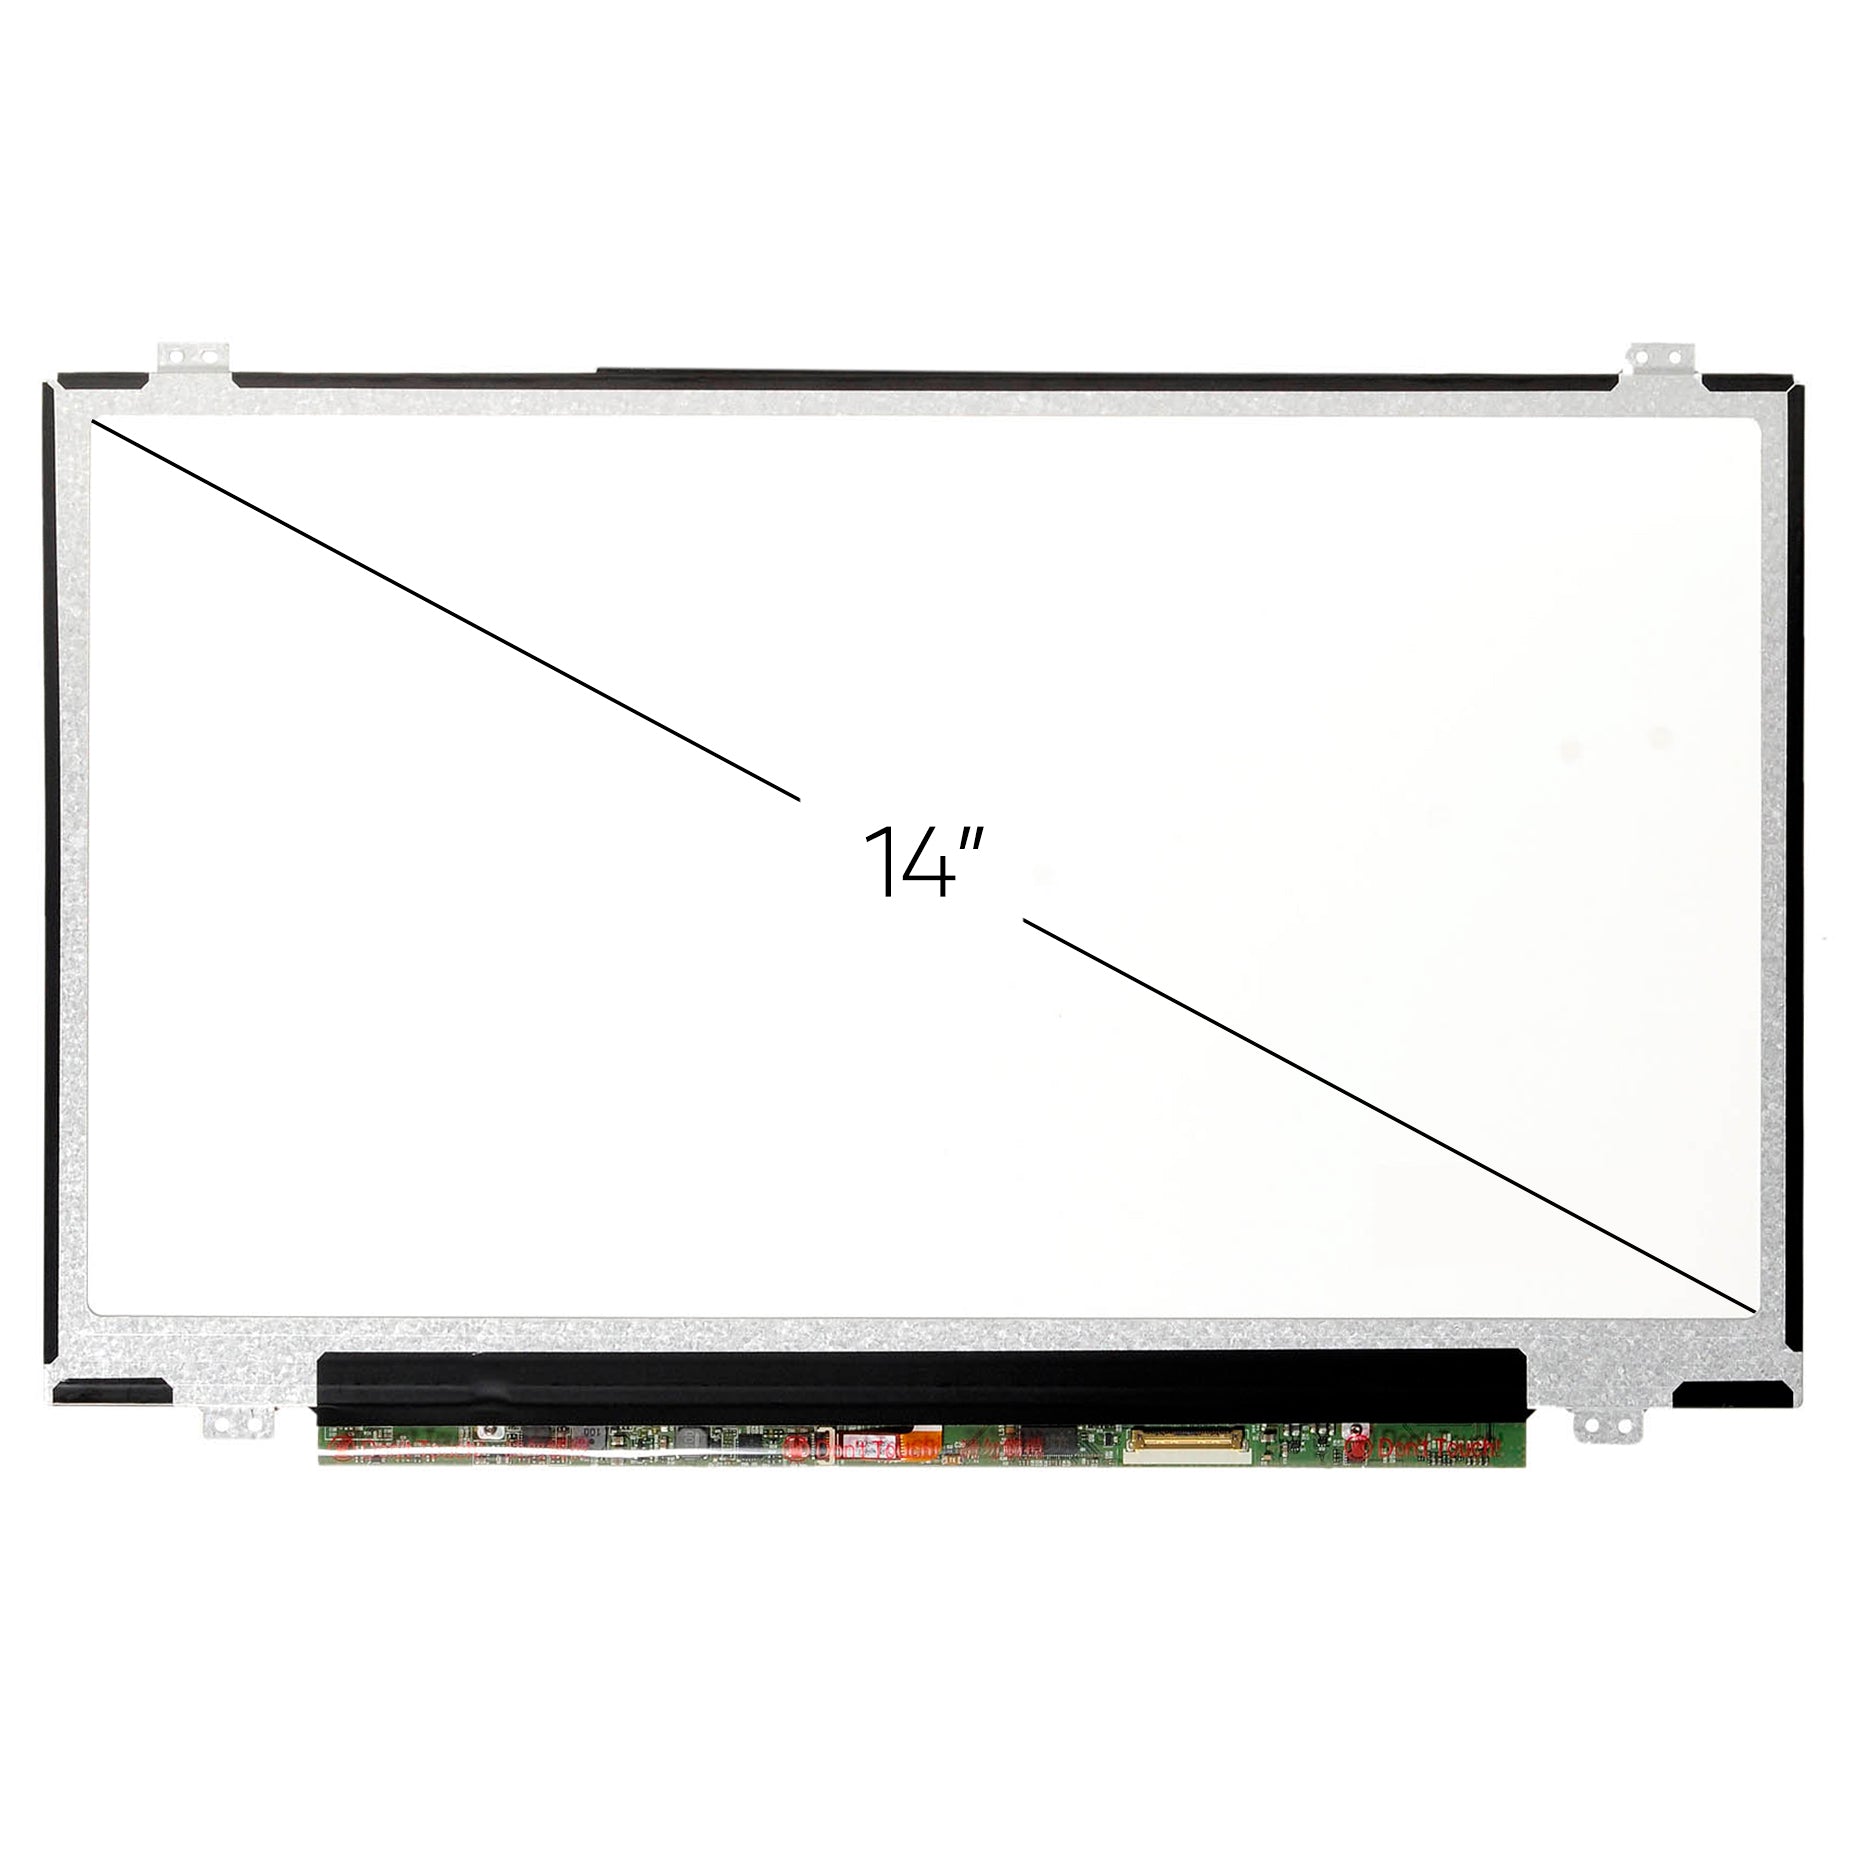 Screen Replacement for ASUS Zenbook UX430U FHD 1920x1080 IPS Matte LCD LED Display